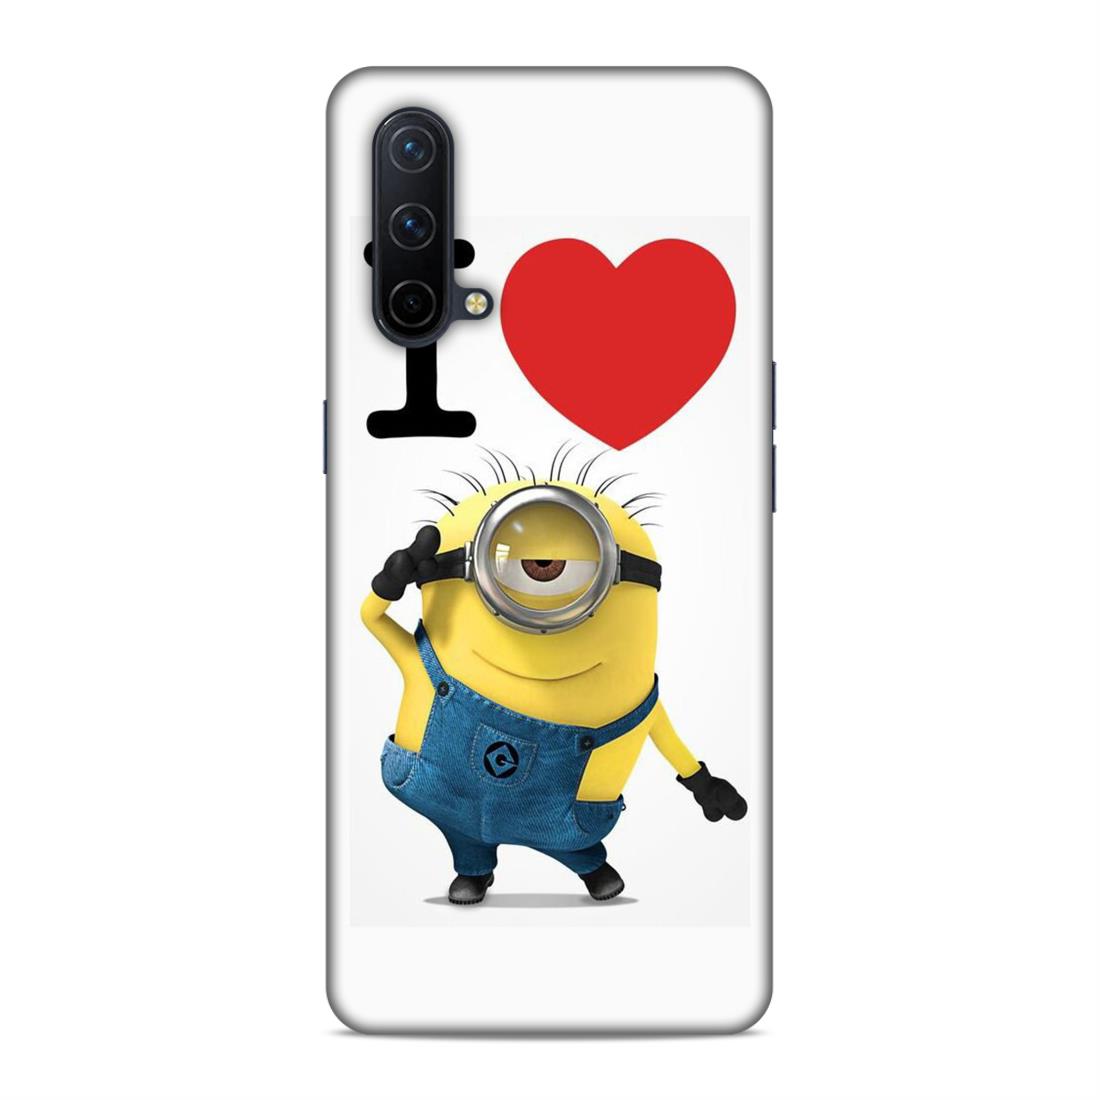 I love Minions Hard Back Case For OnePlus Nord CE 5G